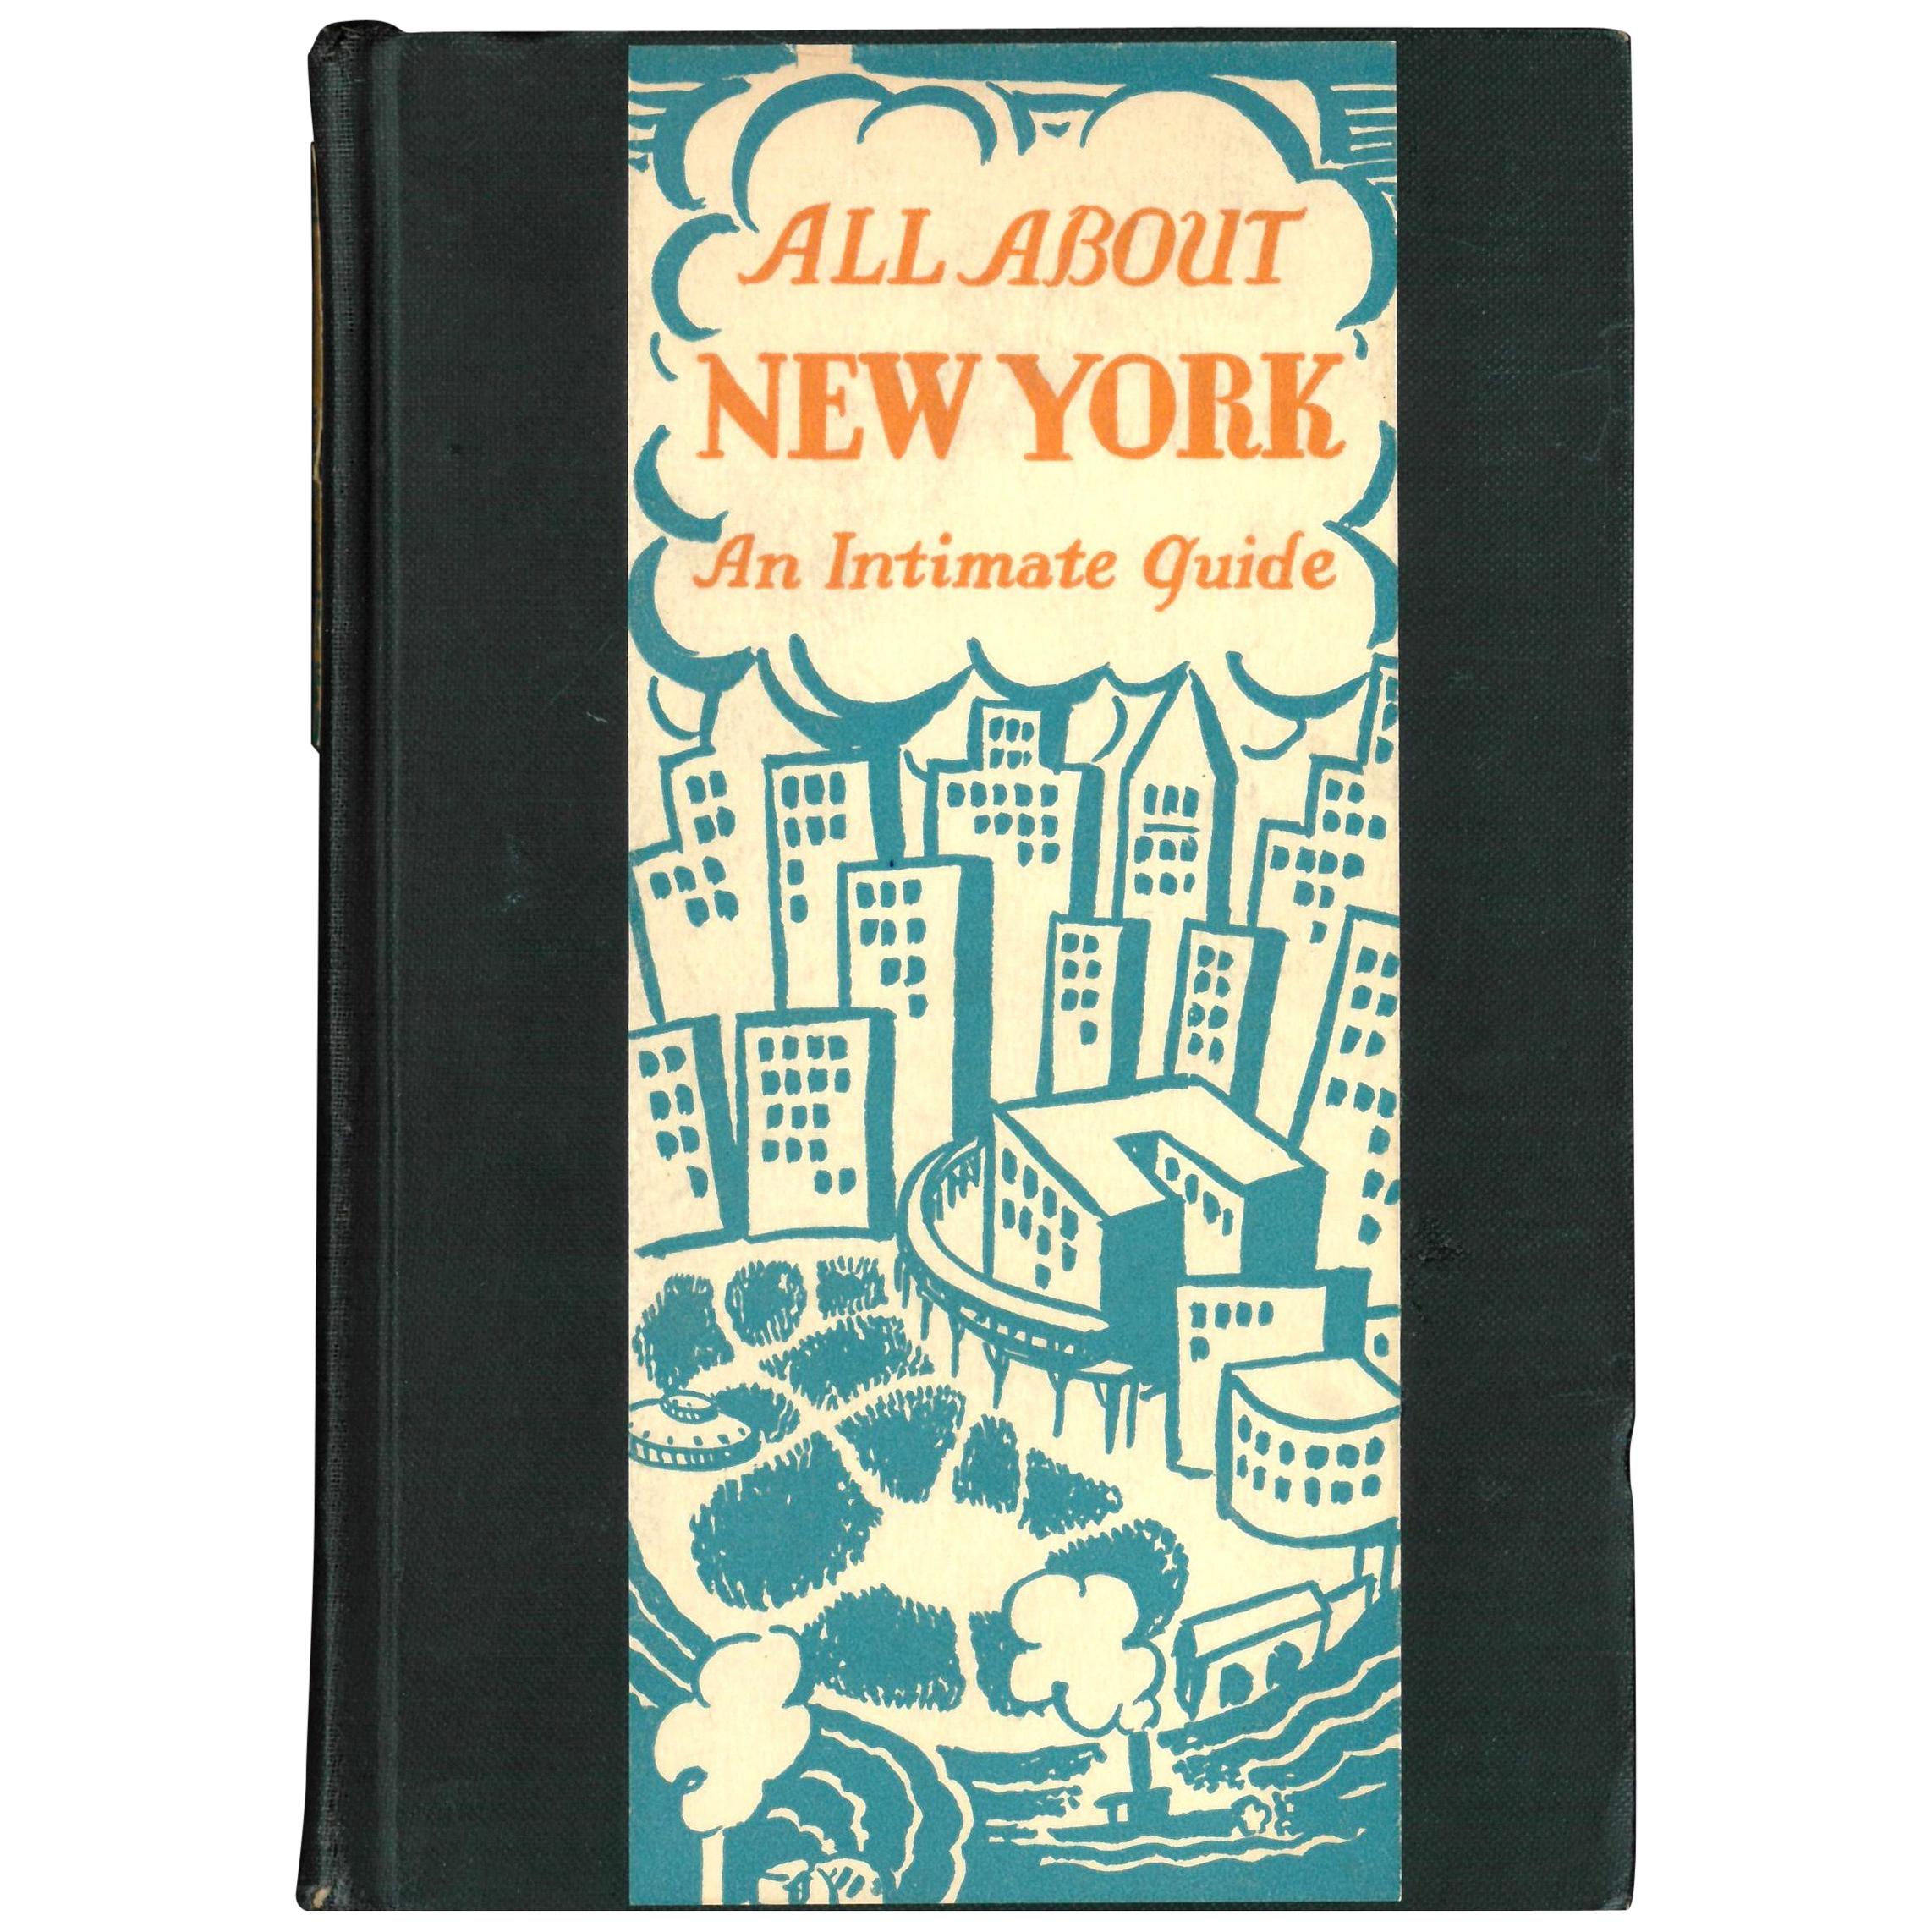 All About New York: An Intimate Guide by Rian James (Book)